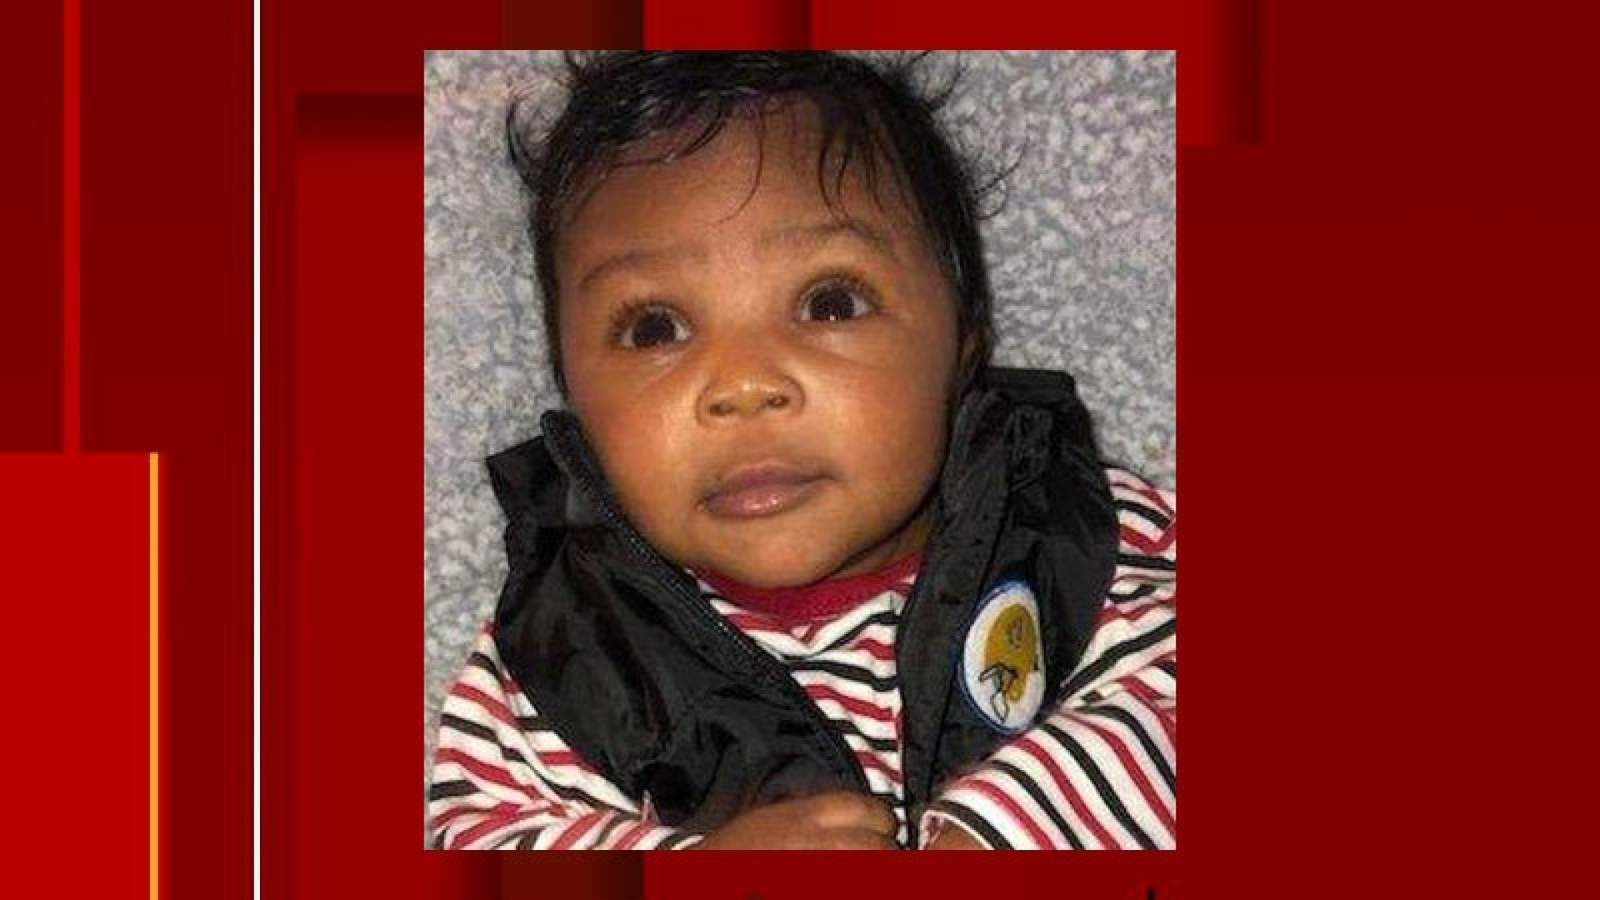 Amber Alert canceled as police say 3-month-old Newport News boy was found safely